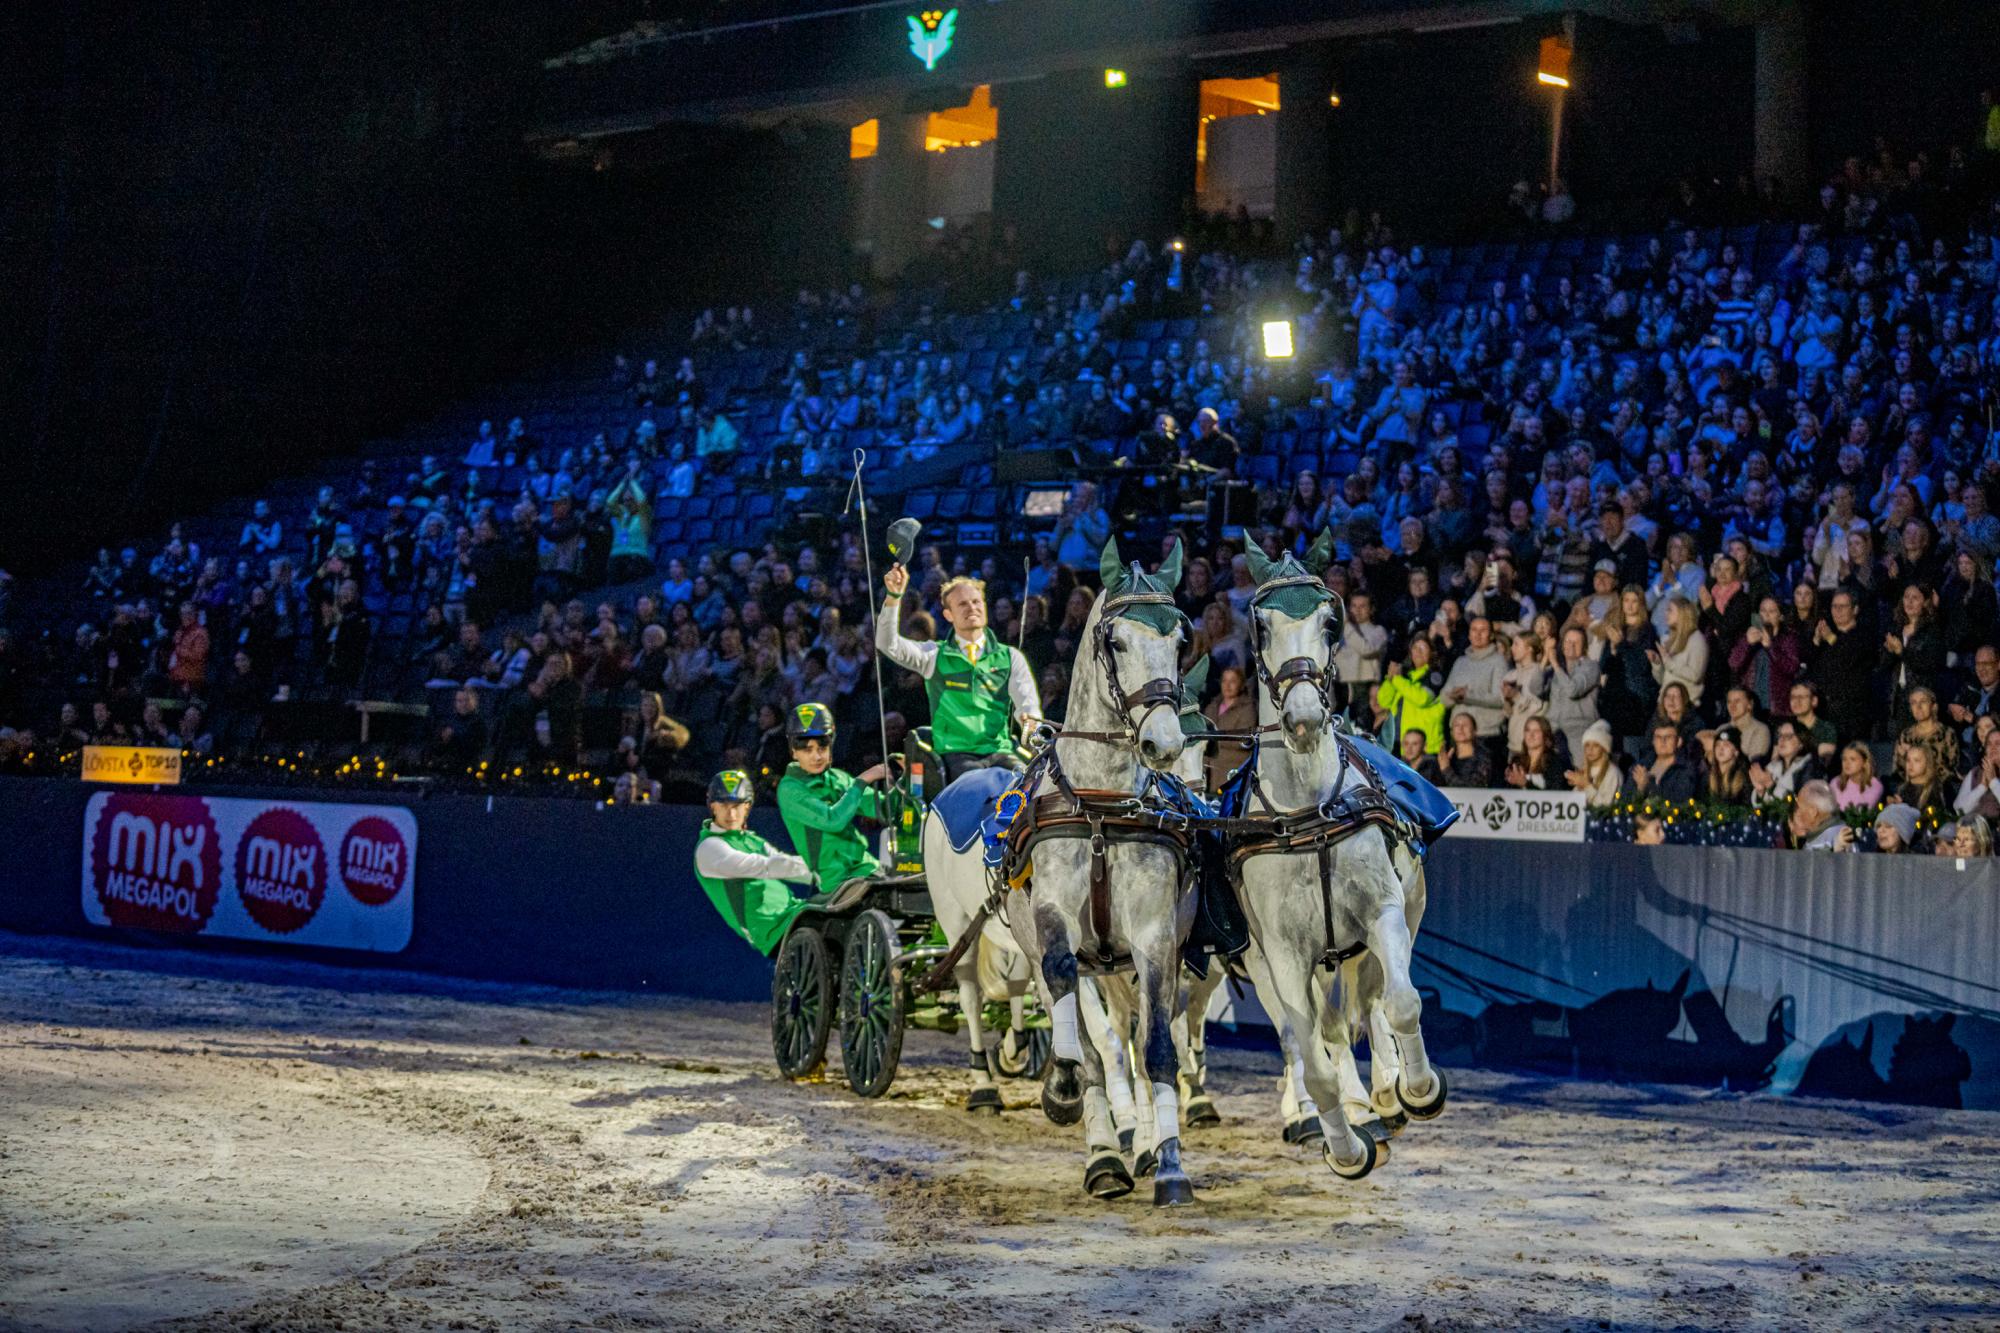 Bram Chardon, "King of Stockholm": "if the horses want to go, then you have to let them and you don’t hold them back"